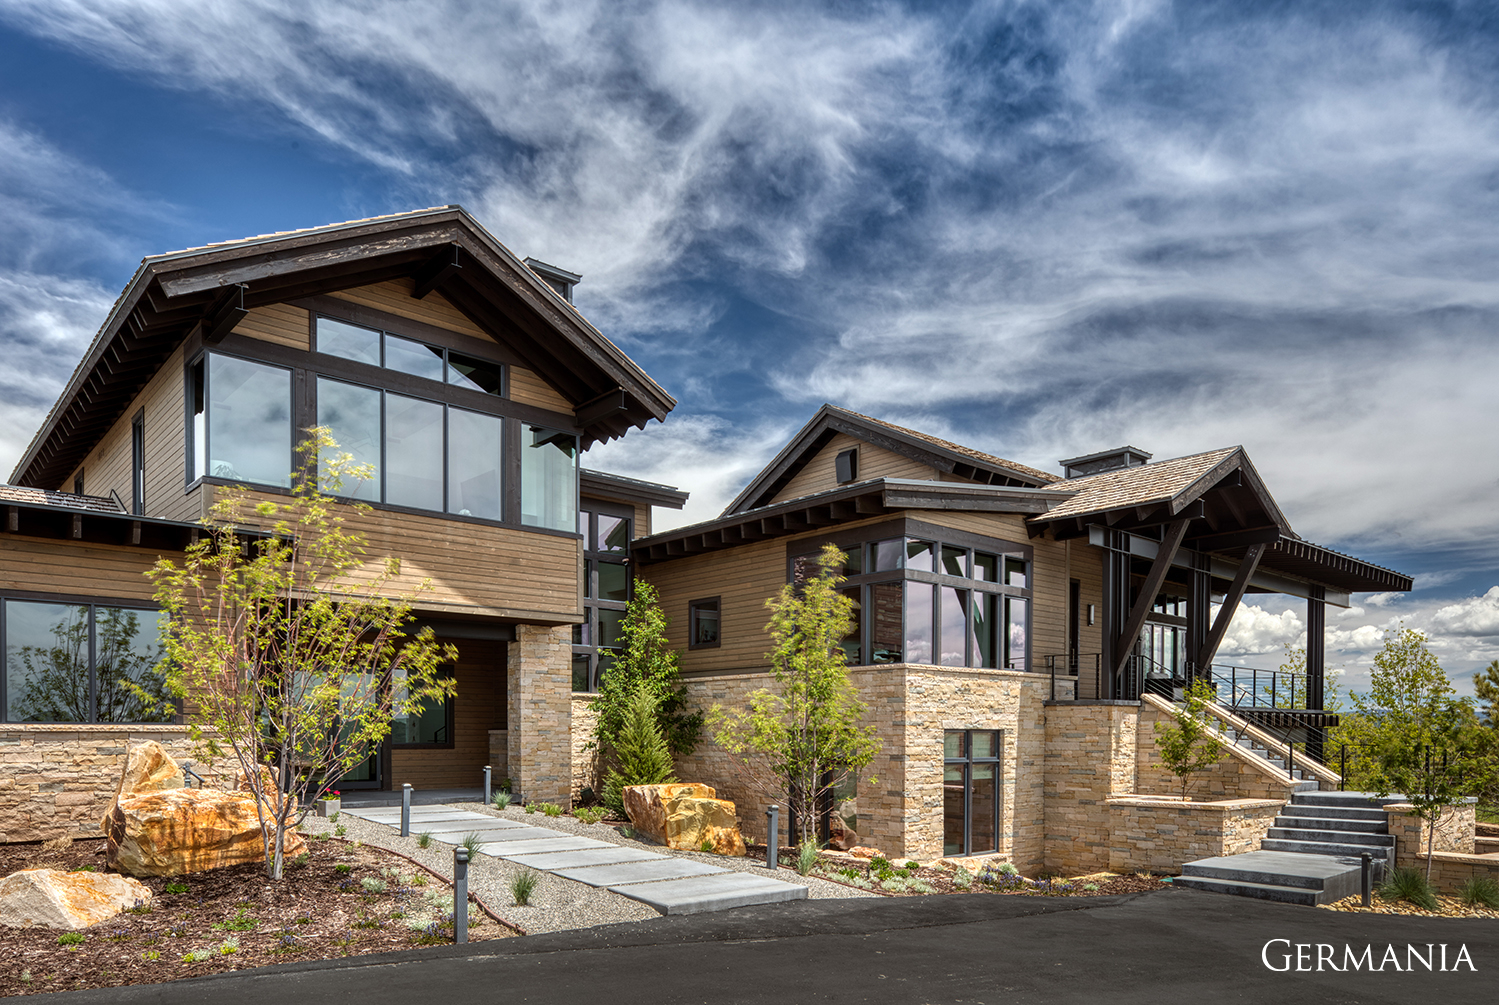 Considering building a custom luxury home? Featured here is one of many luxury builds by Germania. The driveway, stone veneer, and custom walk paths are some of the craftmanship you can expect.